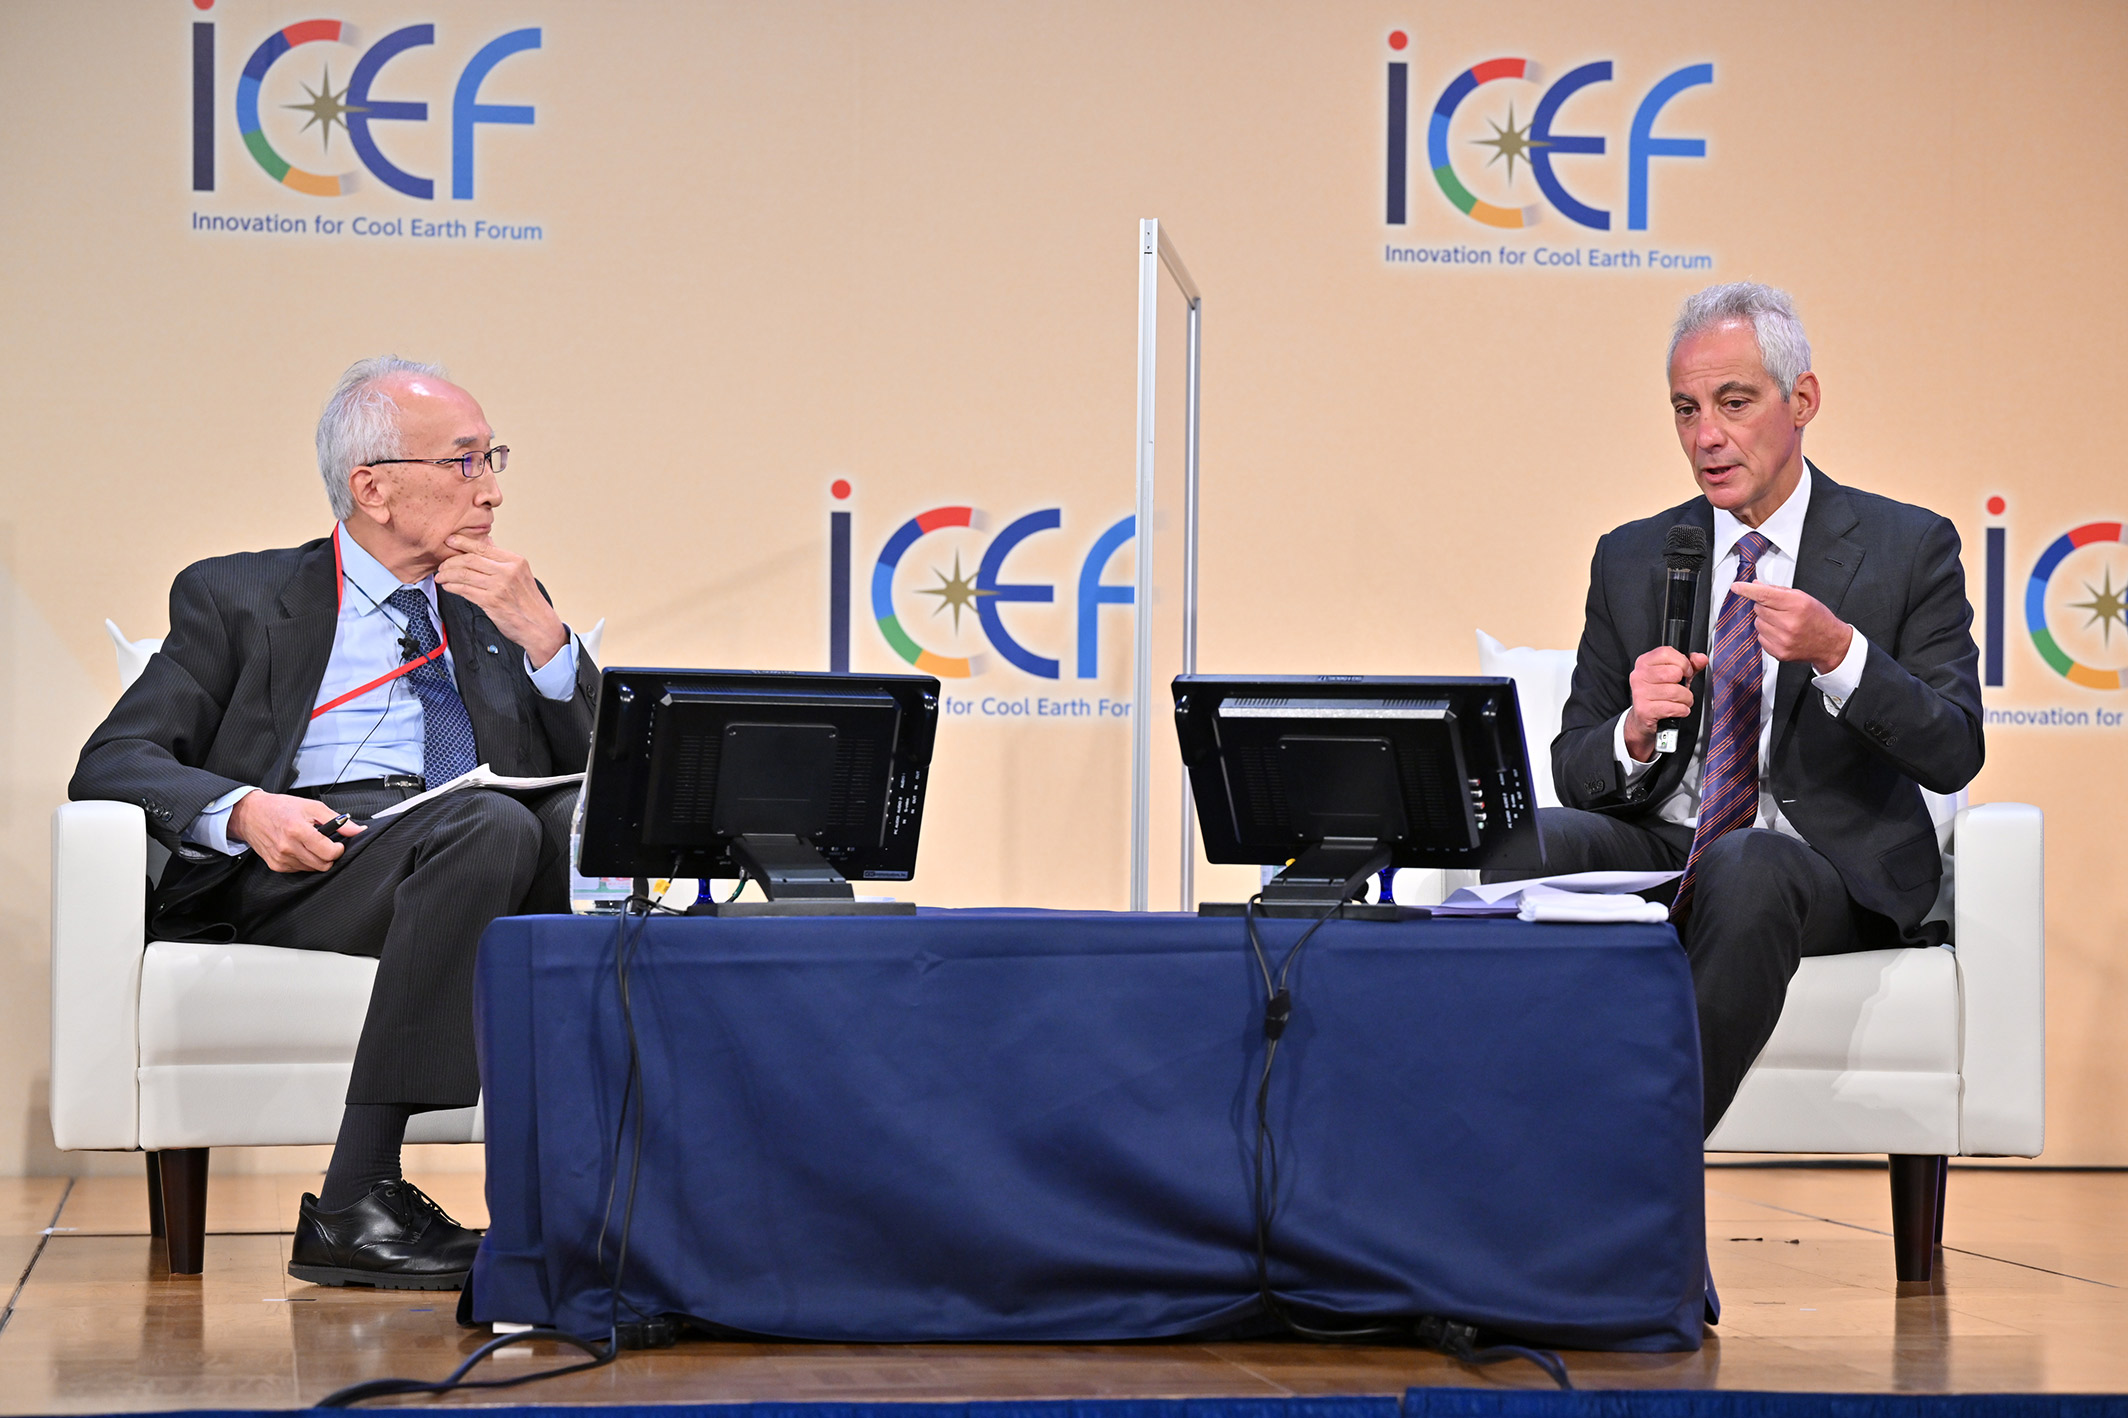 H.E. Rahm Emanuel (Ambassador Extraordinary and Plenipotentiary of the United States of America to Japan) and Mr. TANAKA Nobuo (Chair of ICEF Steering Committee) in the session of Sustainable Nuclear Systems